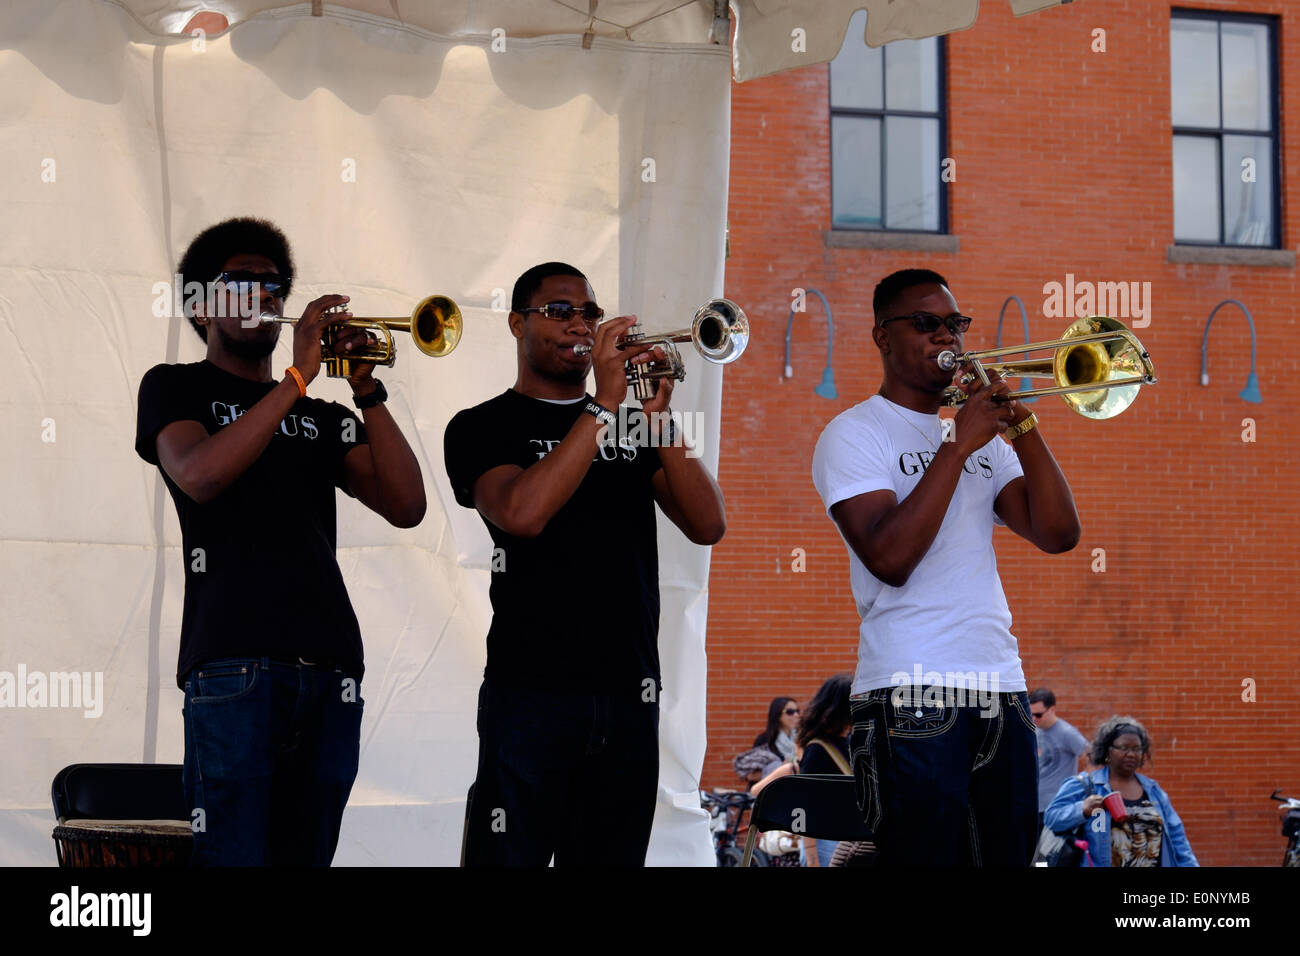 Denver Colorado USA – 17 May 2014 The Black Sunz perform at the 17th Annual Five Points Jazz Festival.  The festival  celebrates the history of Denver’s Five Points Neighborhood once known as the Harlem of the West. Credit:  Ed Endicott/Alamy Live News Stock Photo